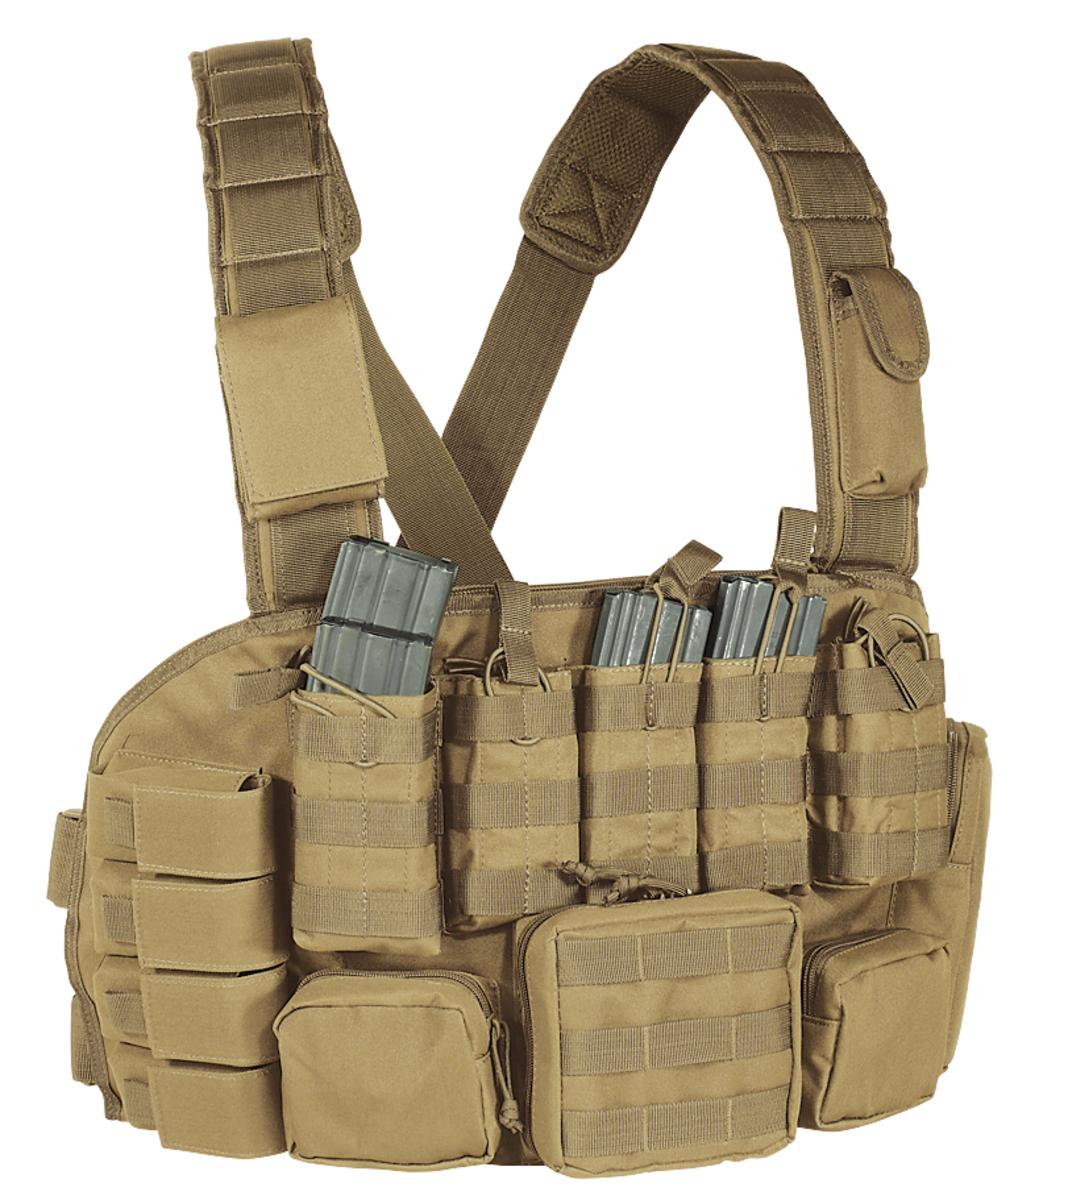 Voodoo Tactical 20-9931 Tactical MOLLE Chest Rig | eBay